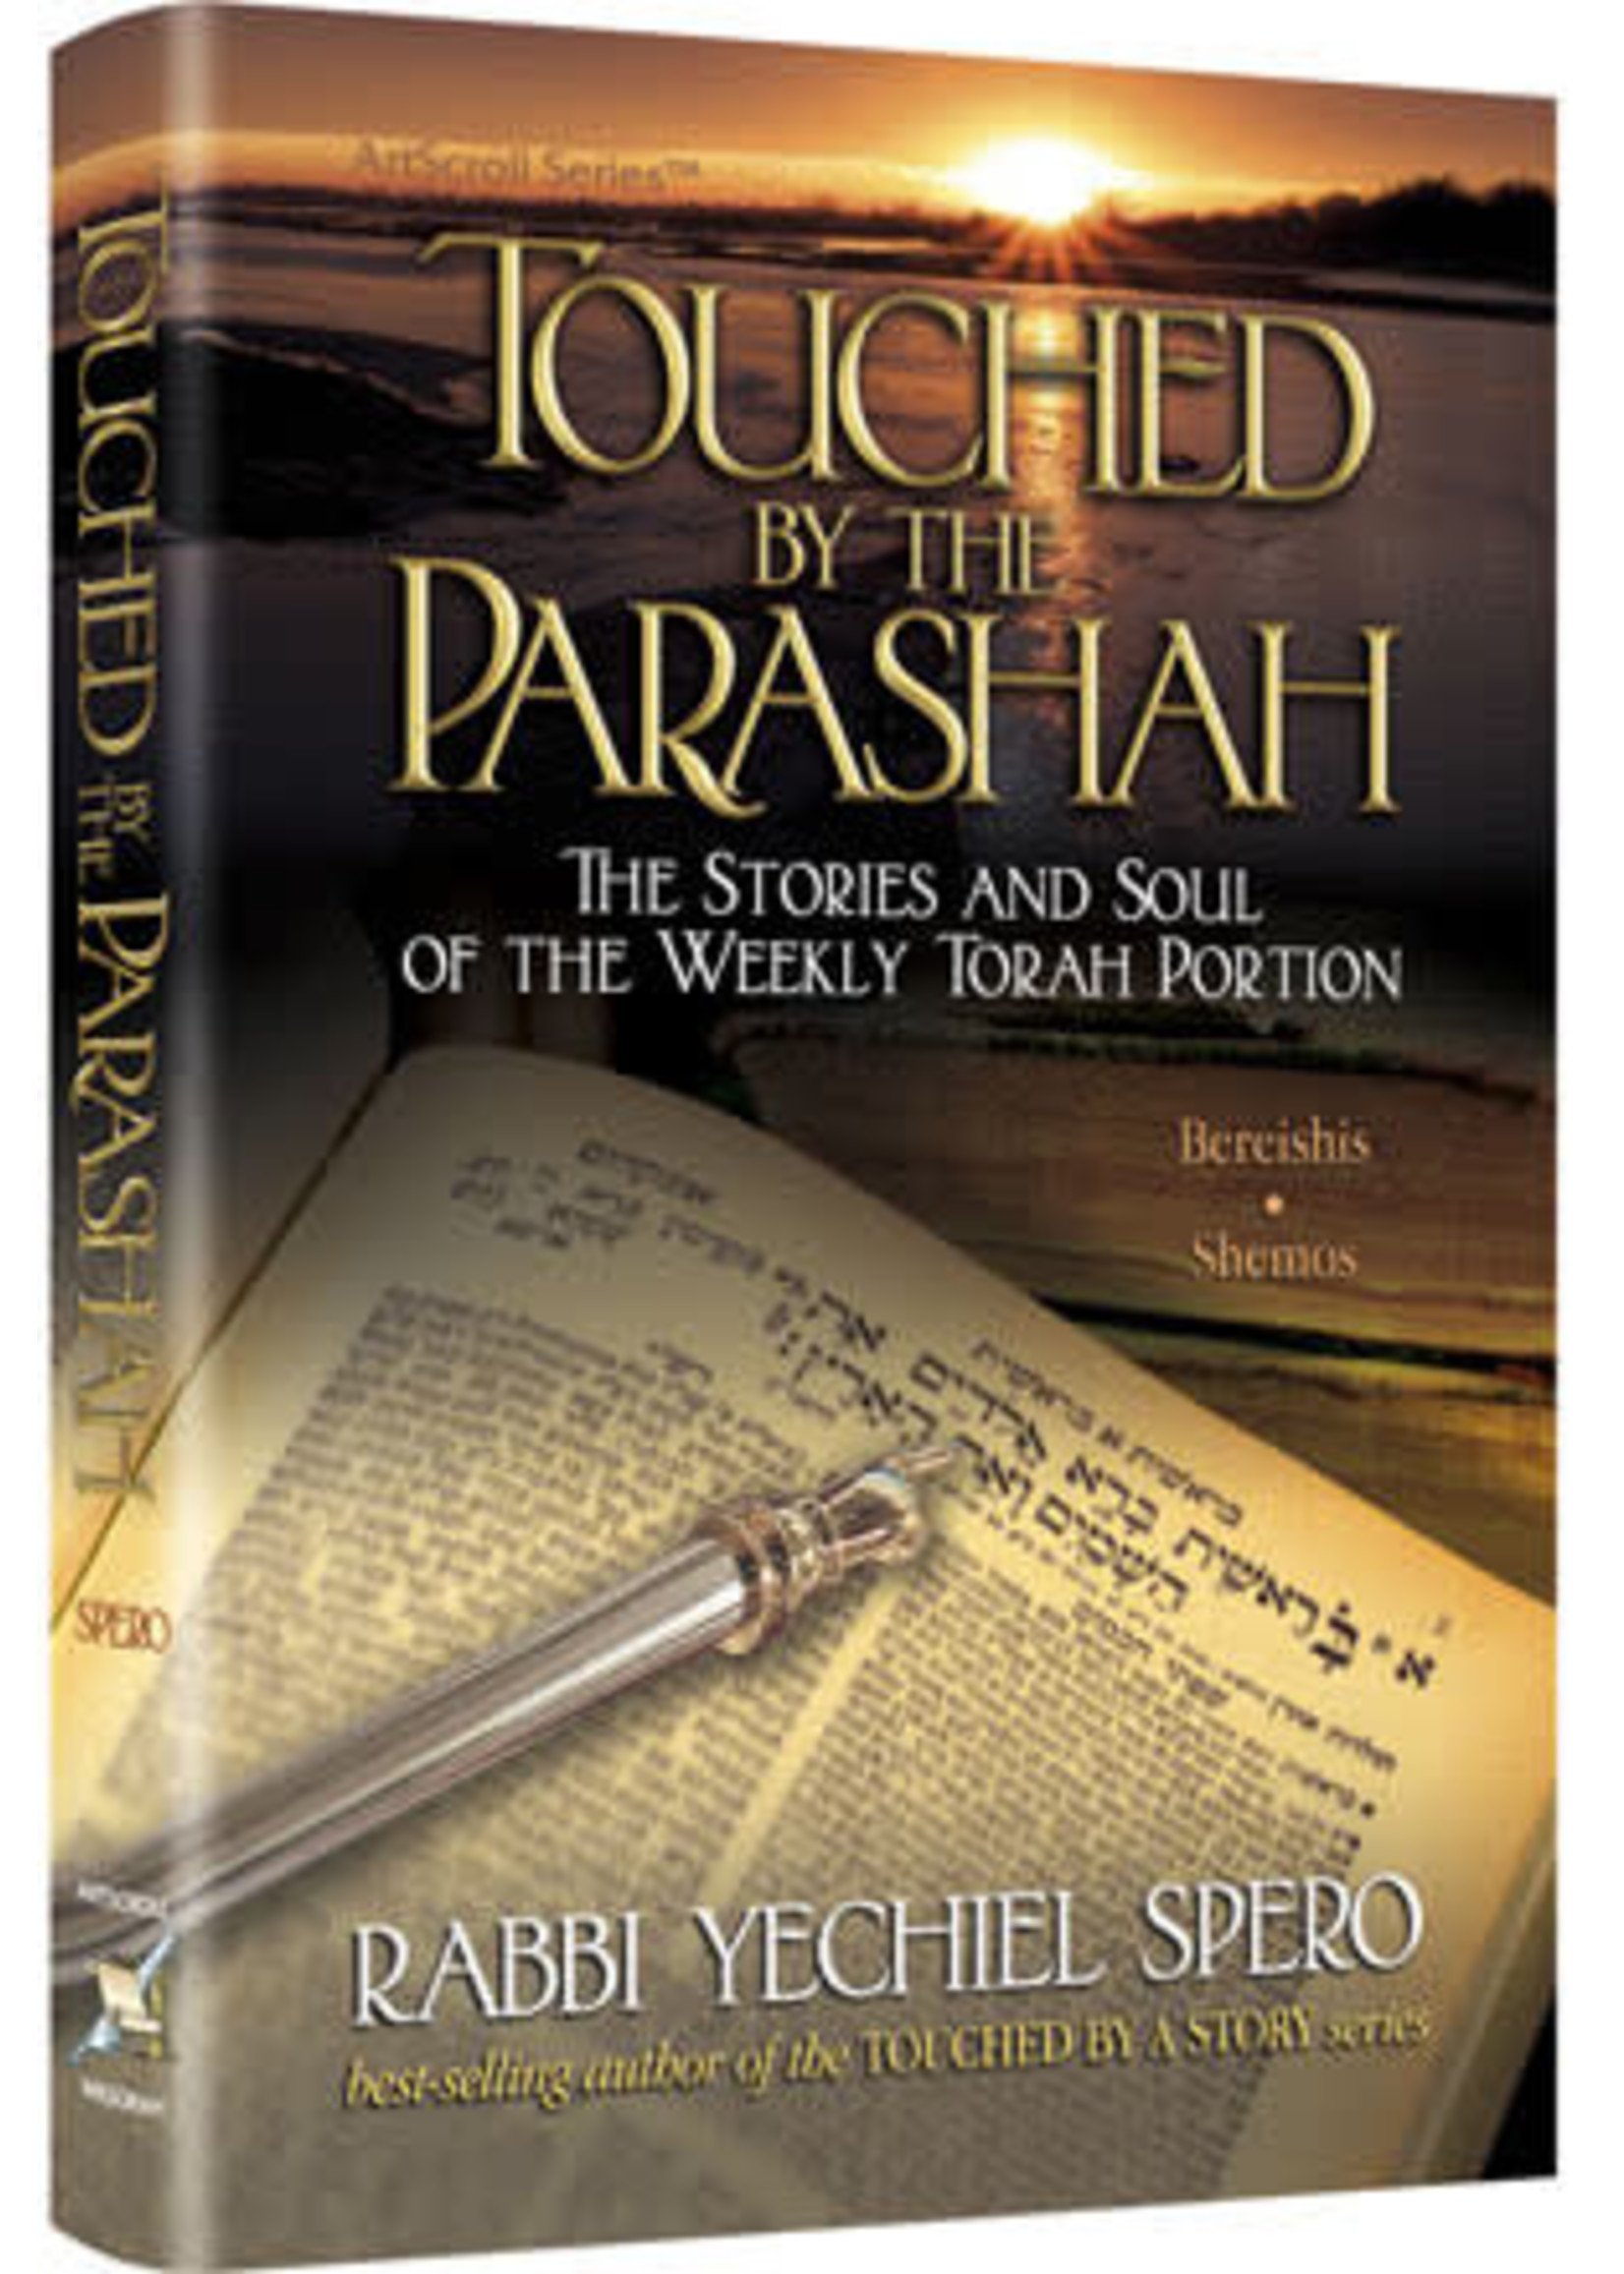 TOUCHED BY THE PARASHAH 315-1